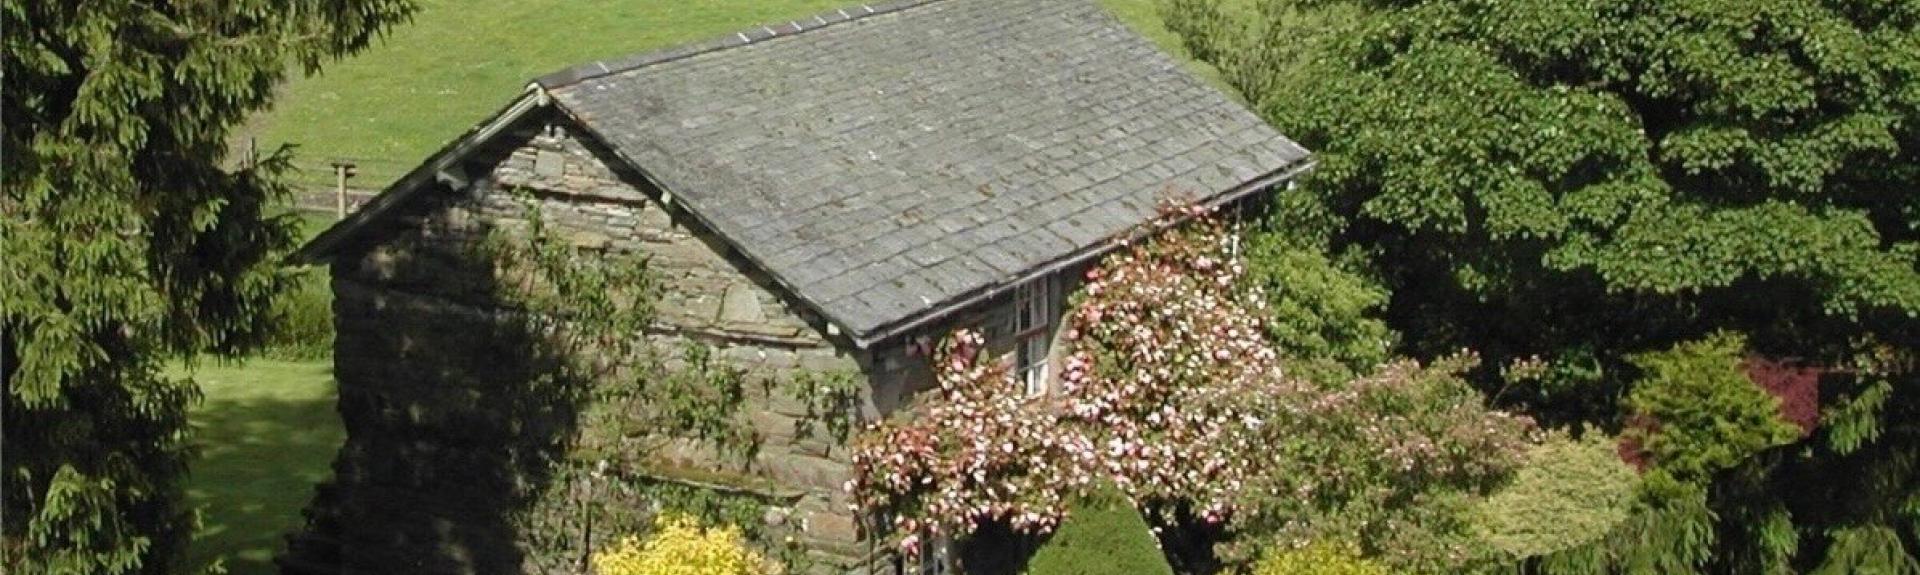 A stone-built, slate-roofed Lake District holiday cottage surrounded by shrubs and small trees with hilly fields in the distance.